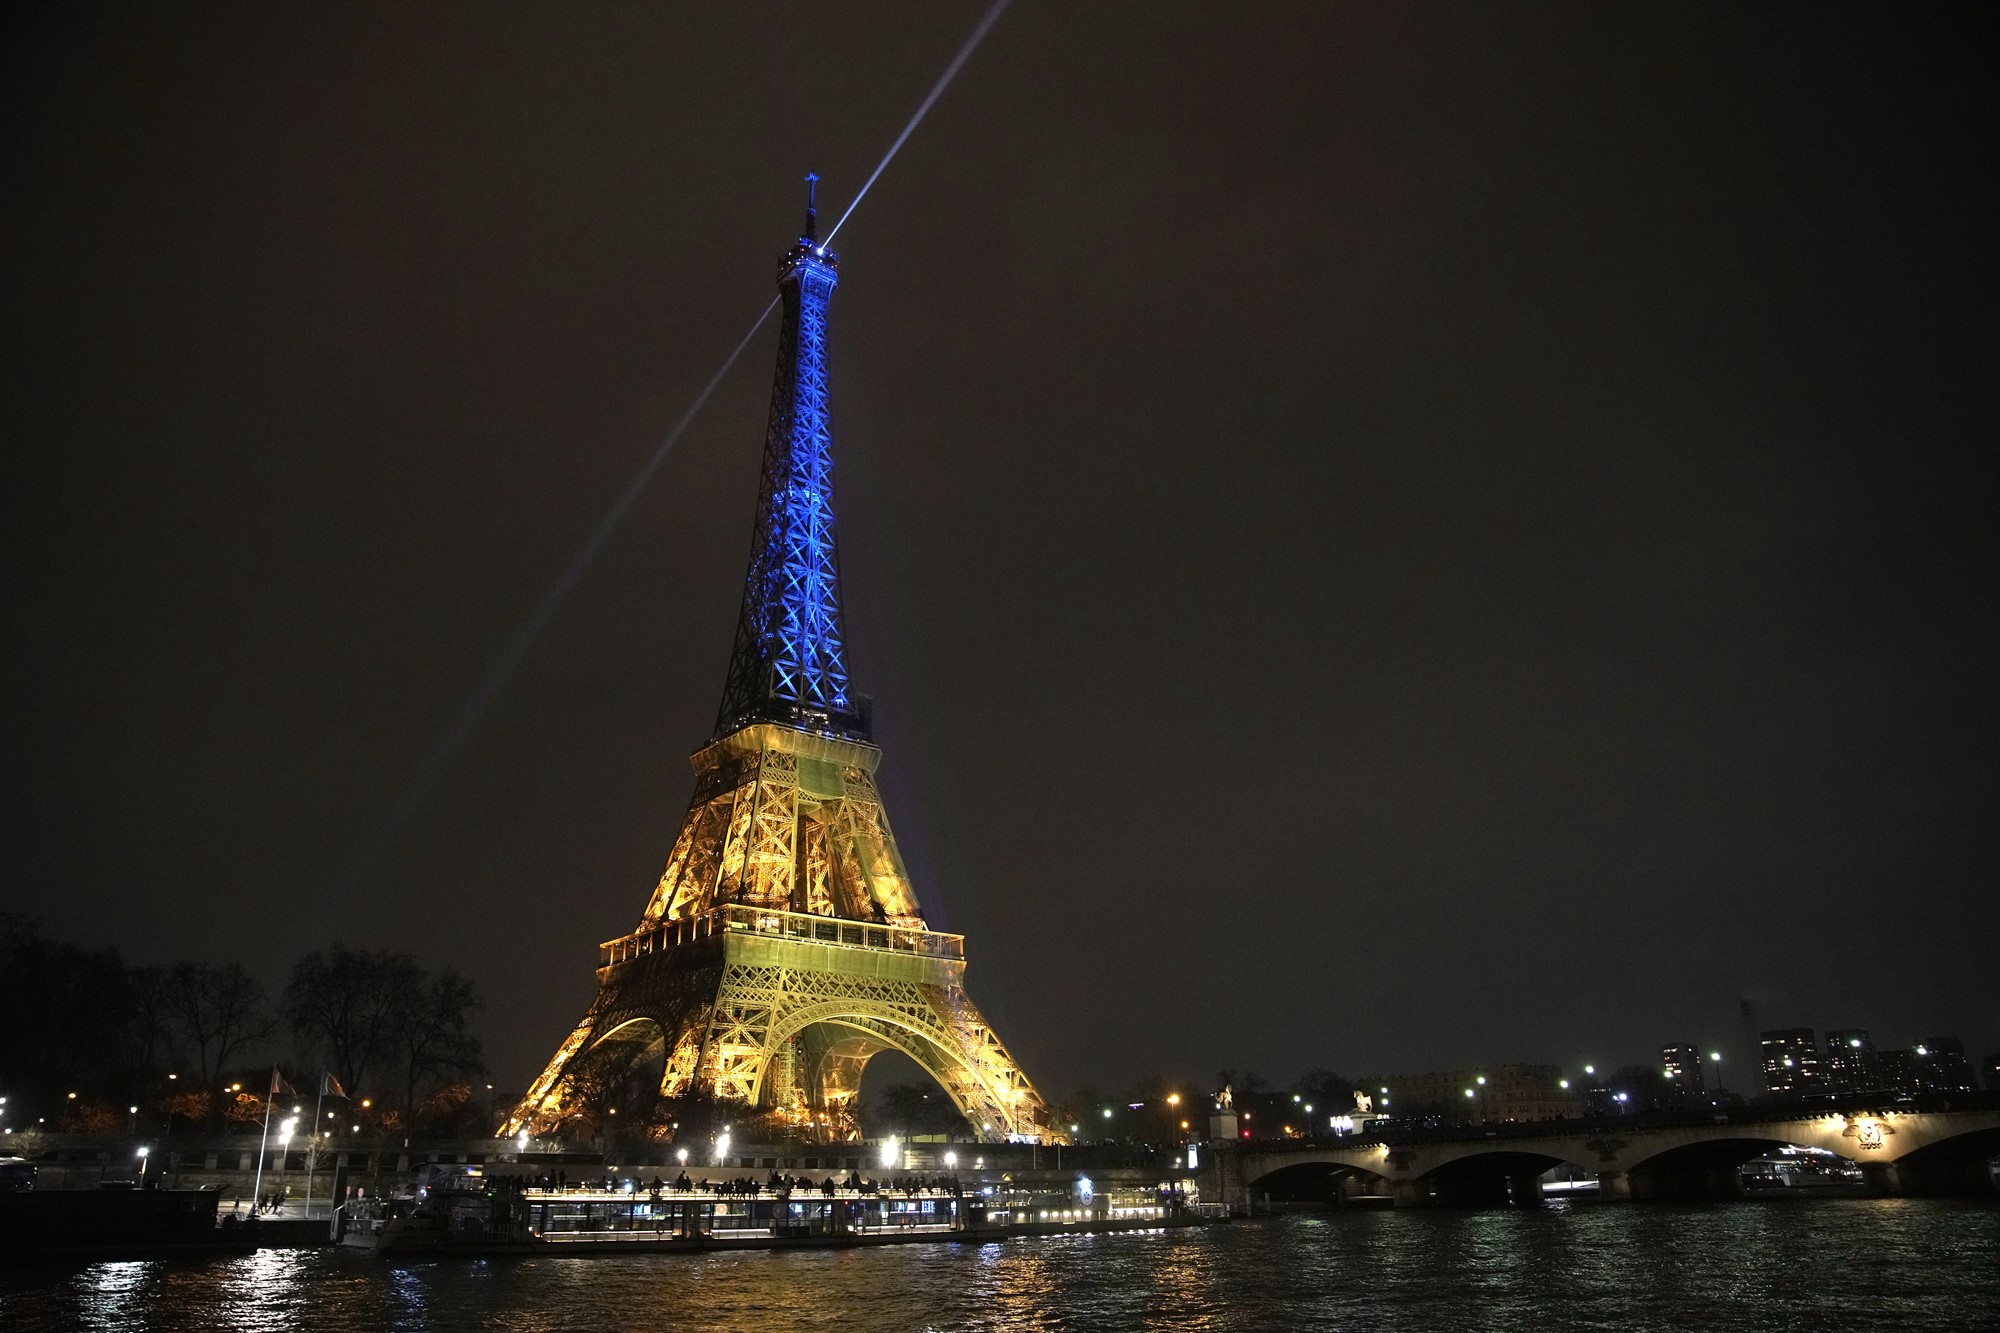 The Eiffel Tower lit up in blye and yellow.